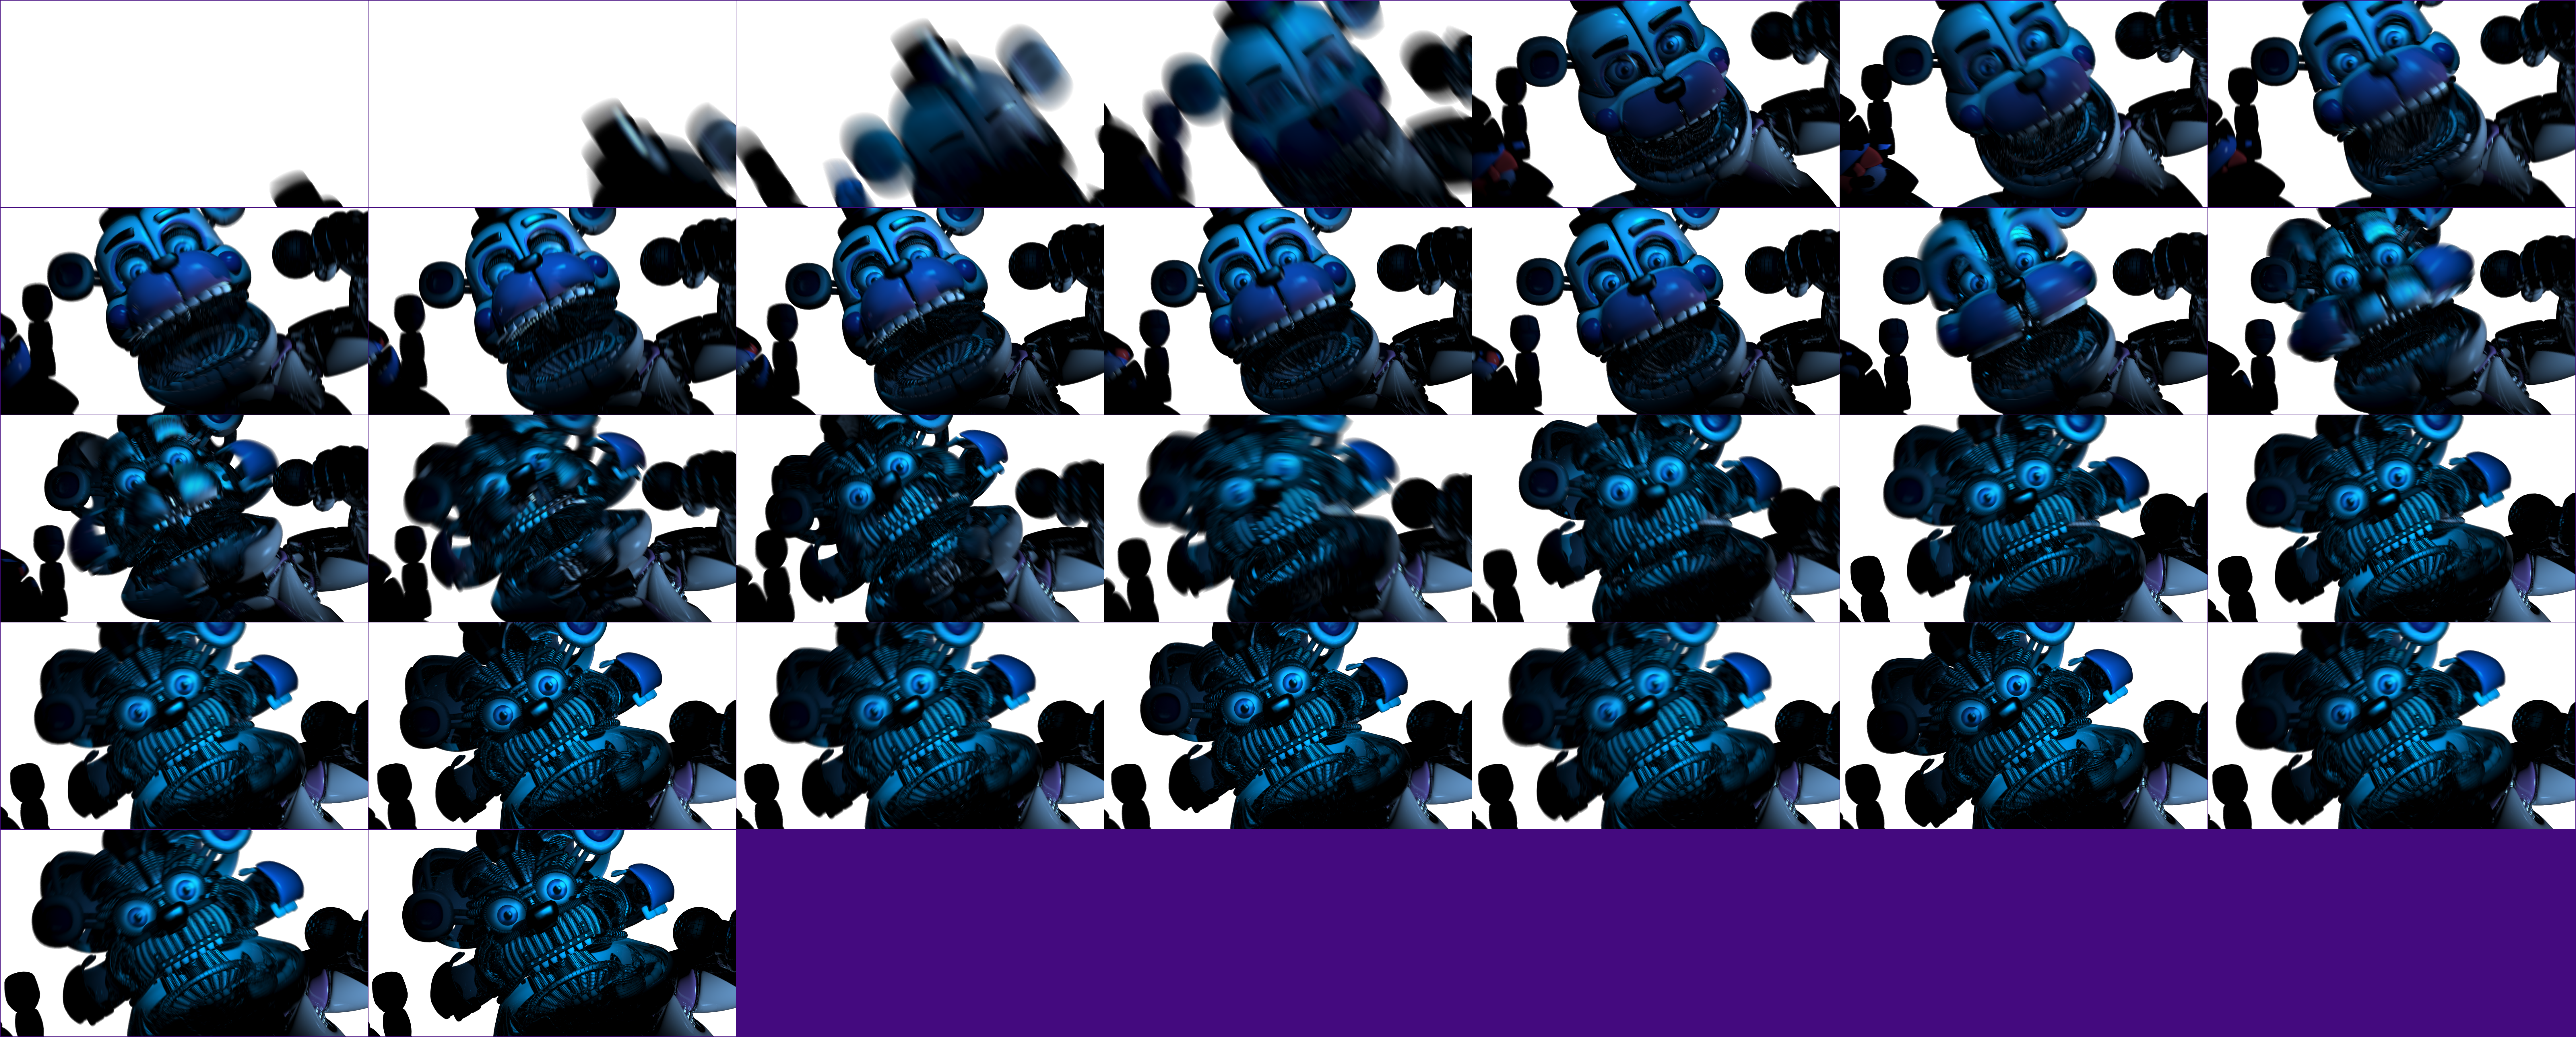 Five Nights at Freddy's: Sister Location - Funtime Freddy